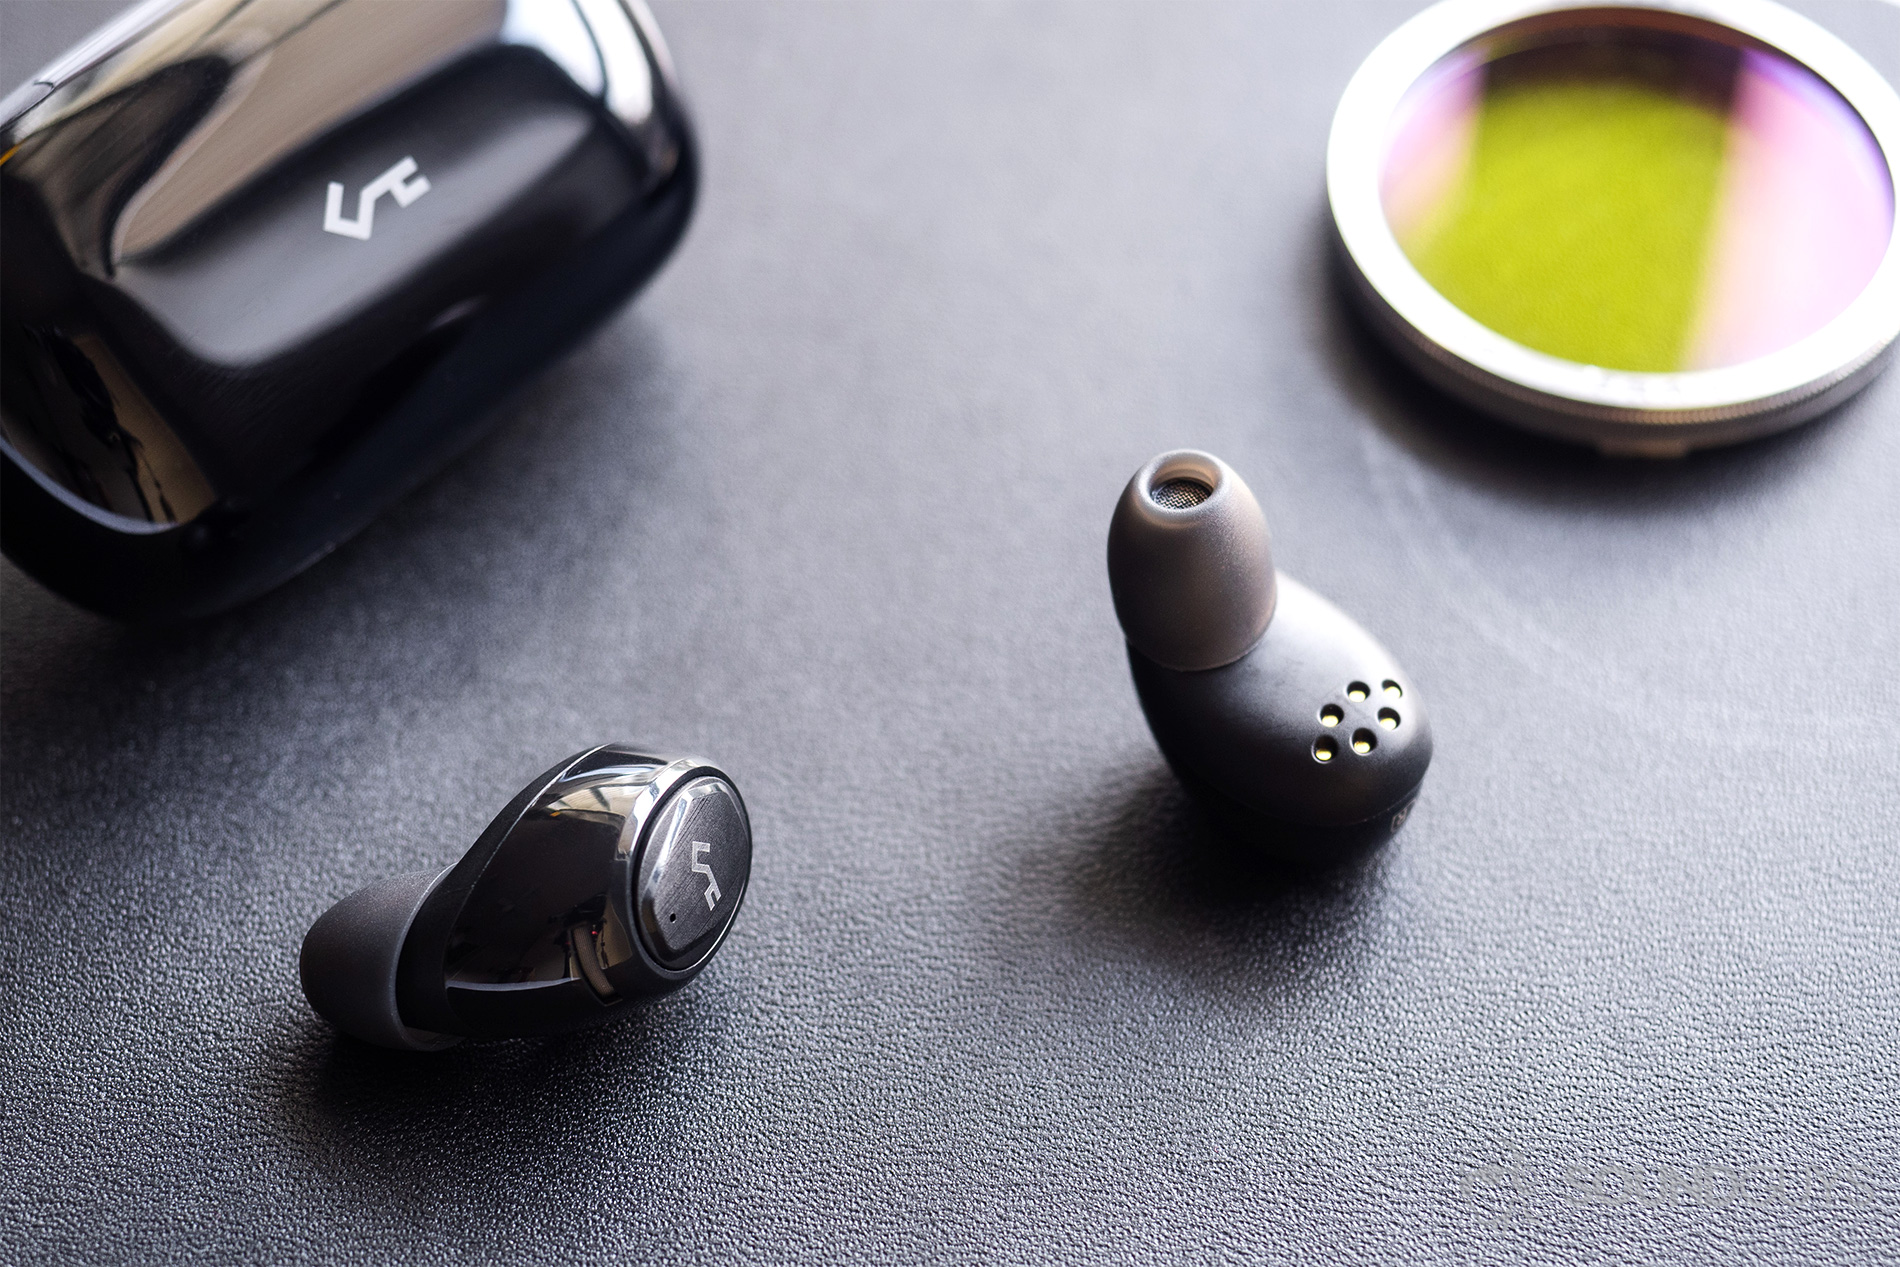 Aukey EP-T16 review: The earbuds lying adjacent to the charging case with a lens filter in the top right corner of the image.